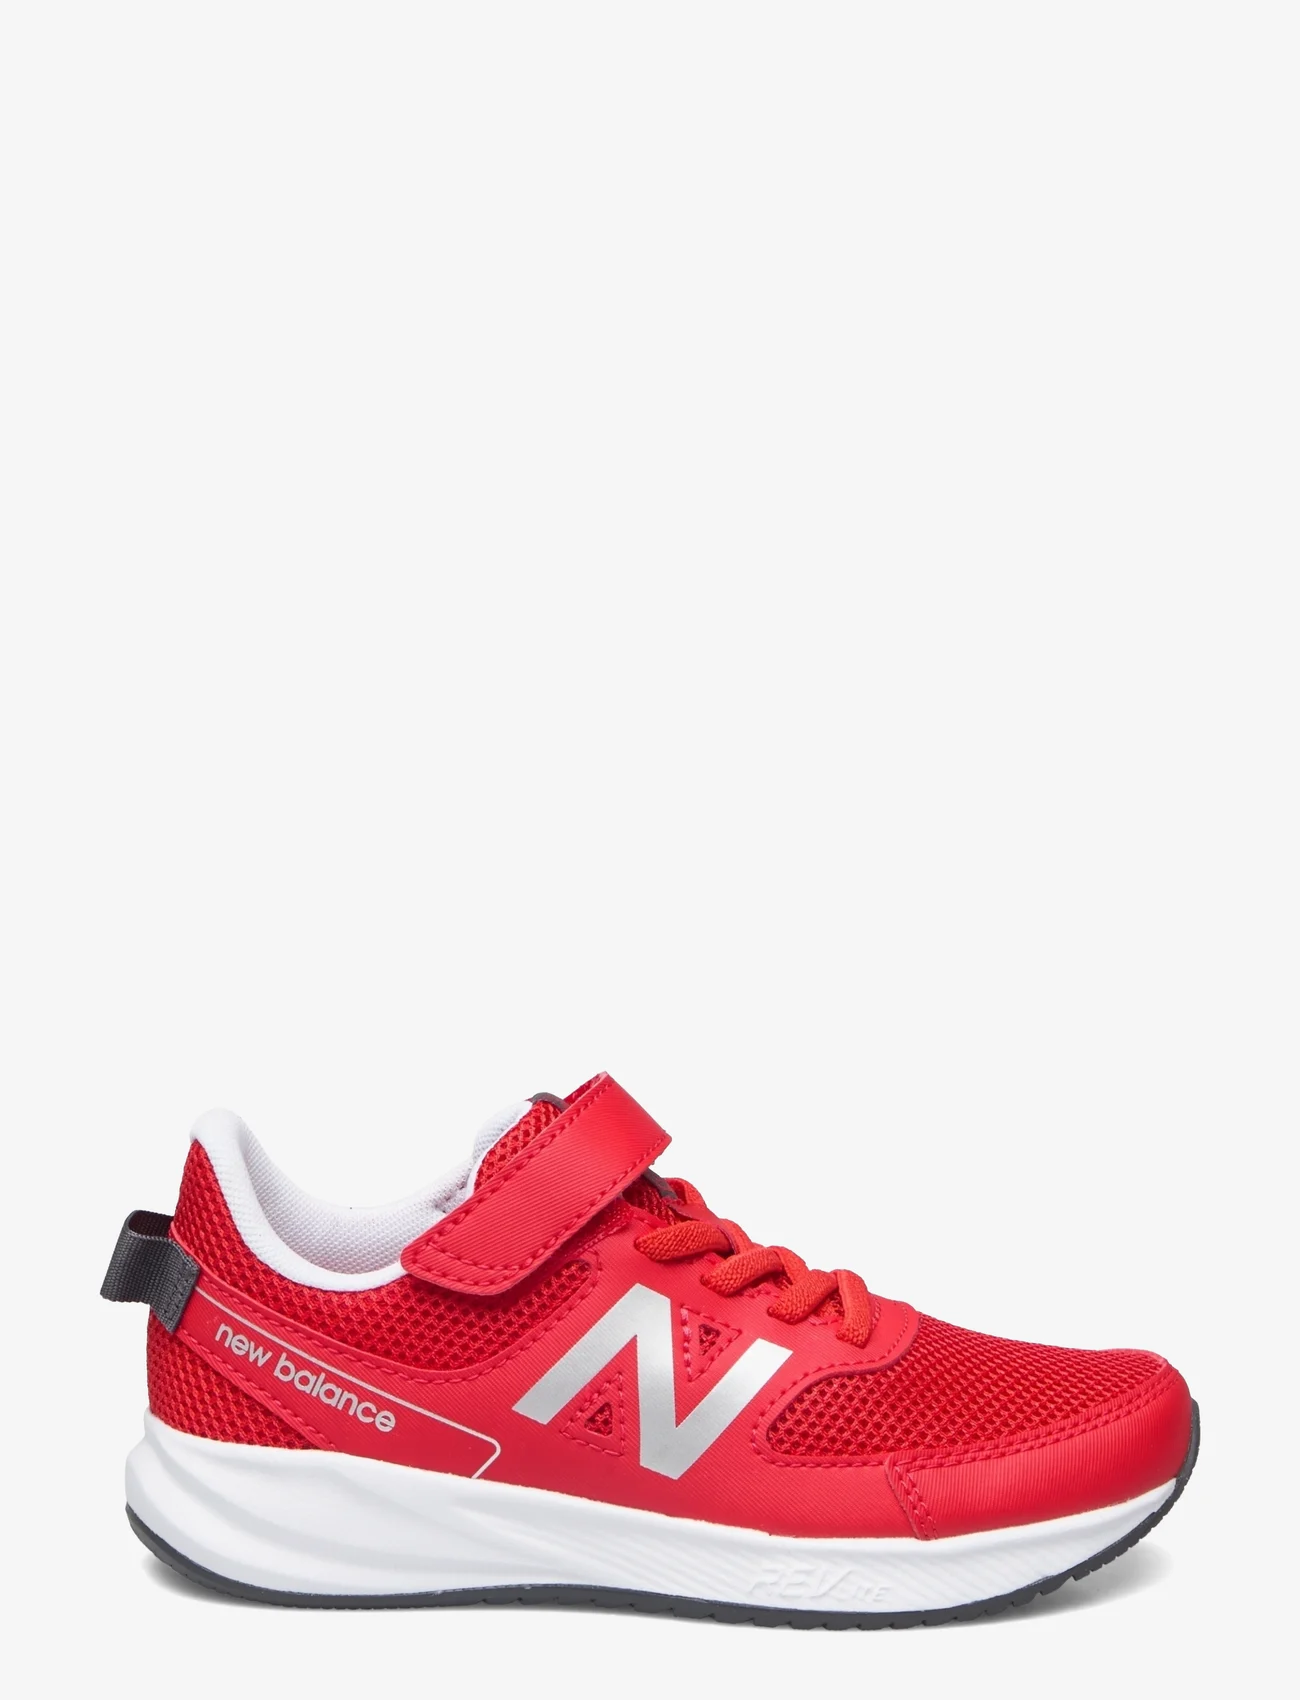 New Balance - New Balance 570 v3 Kids Bungee Lace with Hook & Loop Top Strap - kinderen - true red - 1